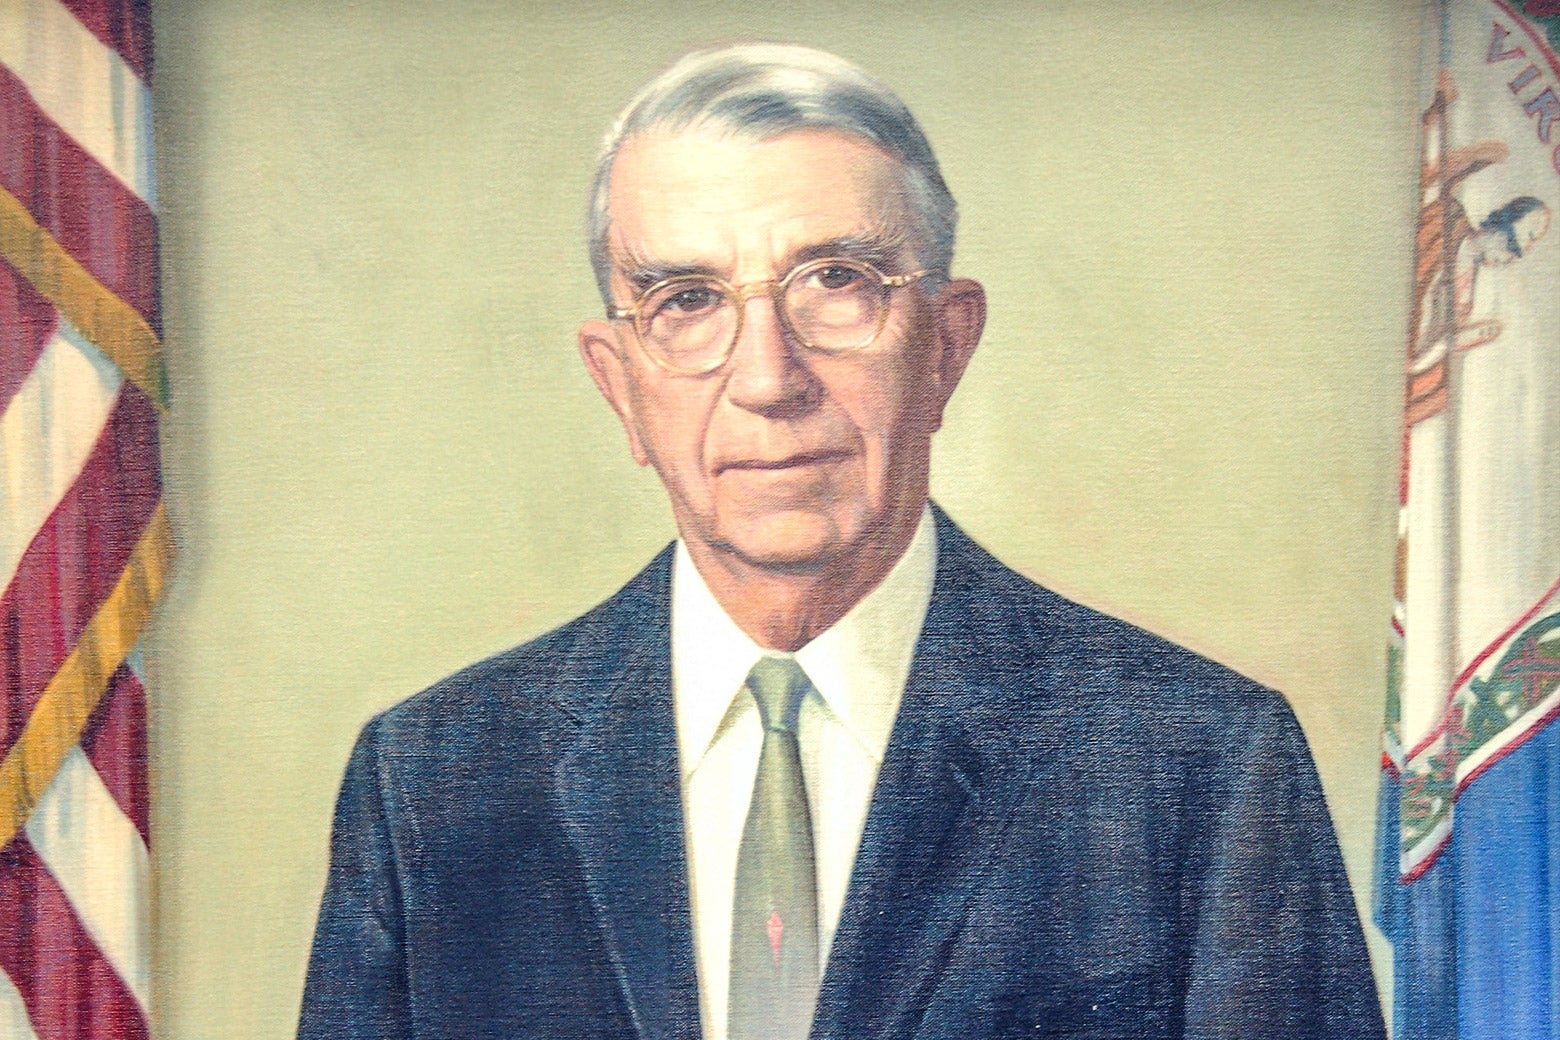 Portrait of Howard W. Smith, member of the United States House of Representatives.